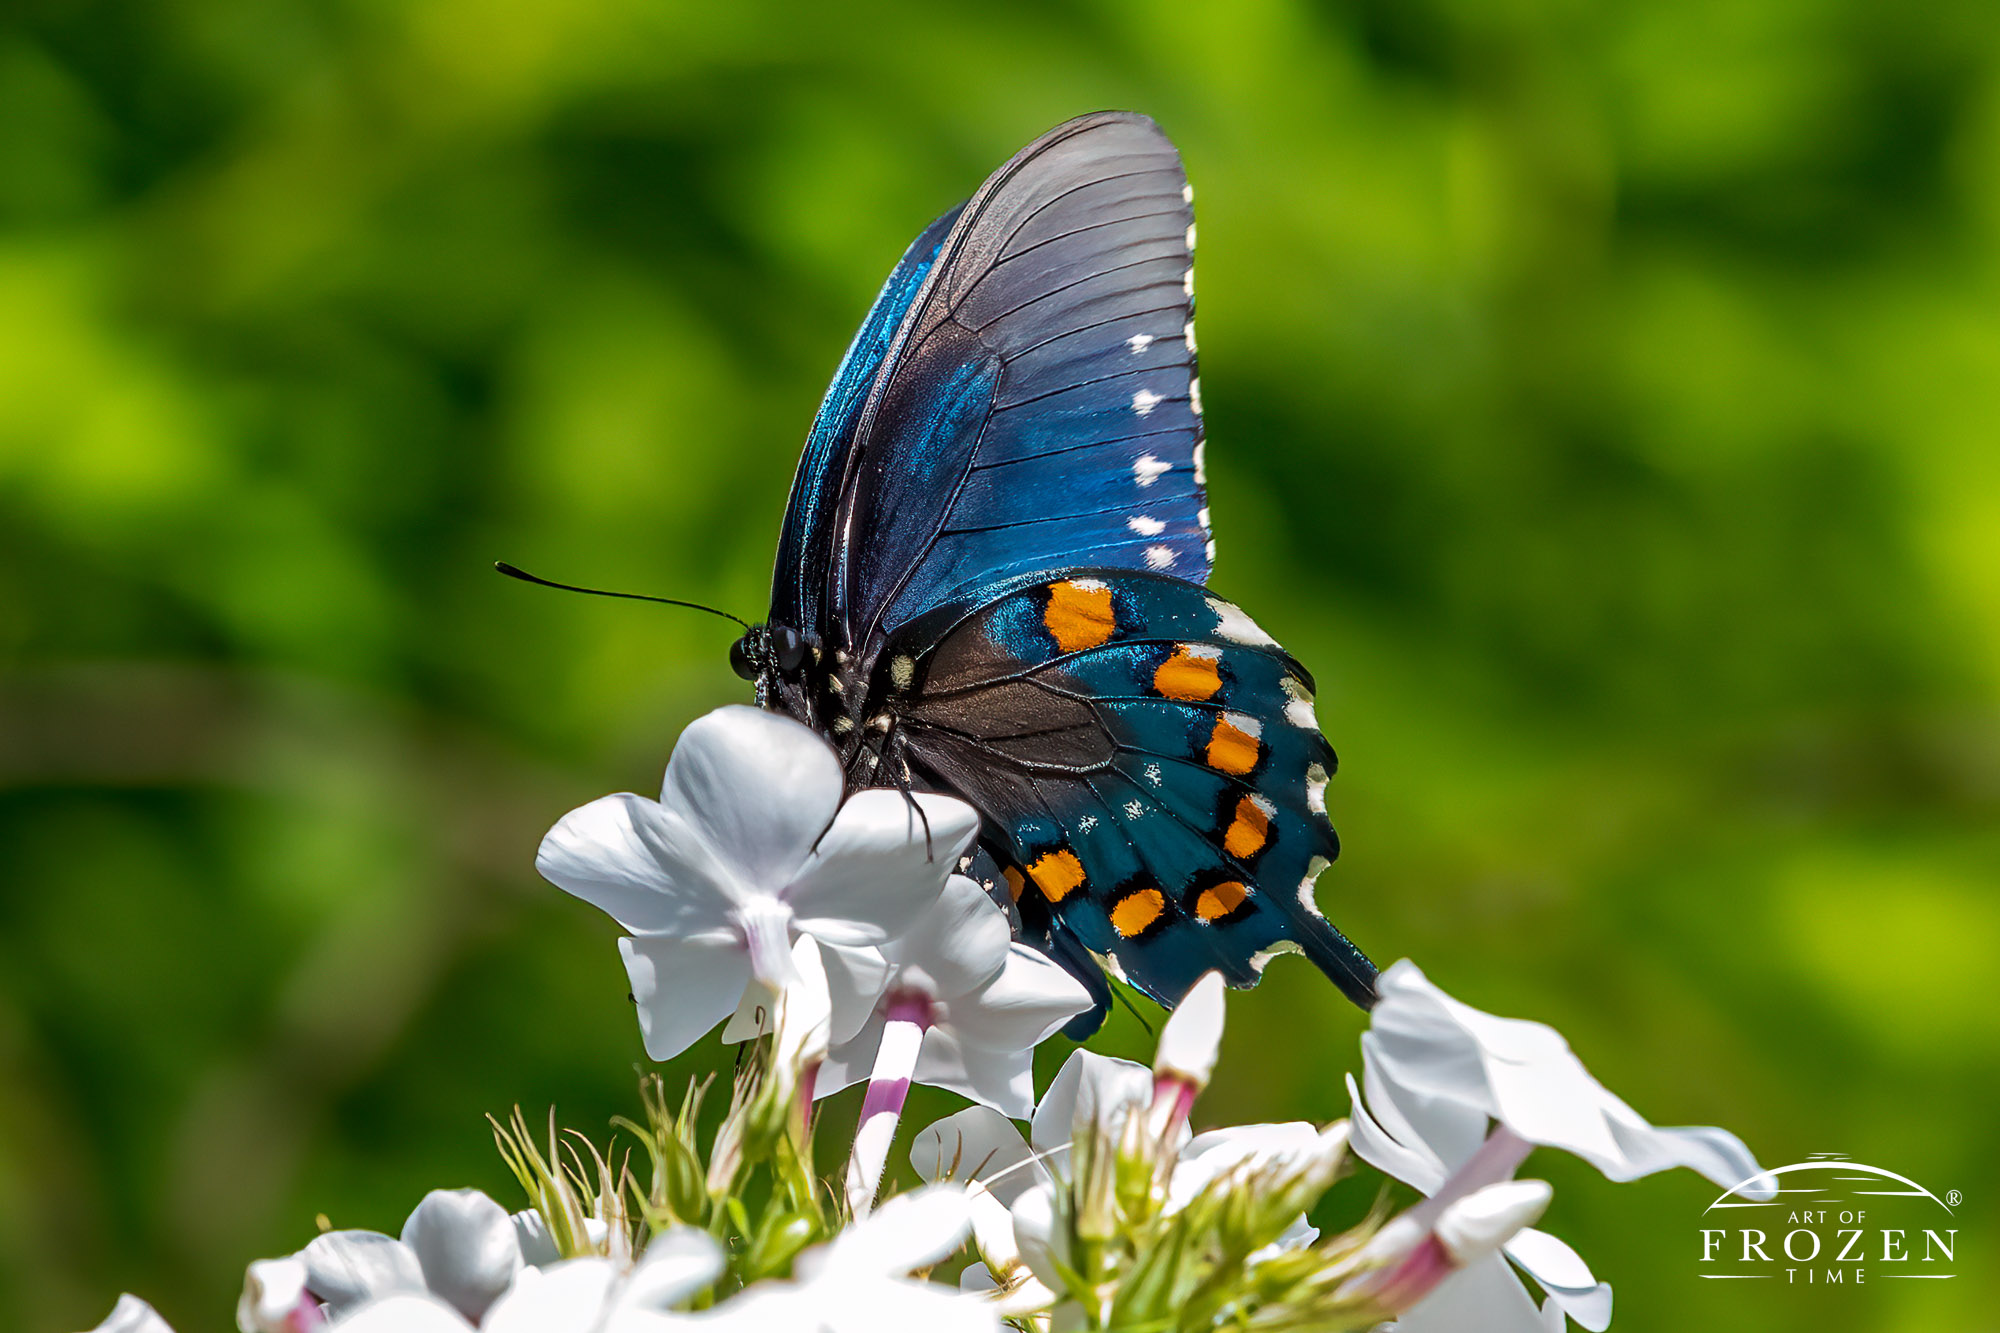 A Spicebush Swallowtail Butterfly briefly pollinating a white flower at Aullwood MetroPark